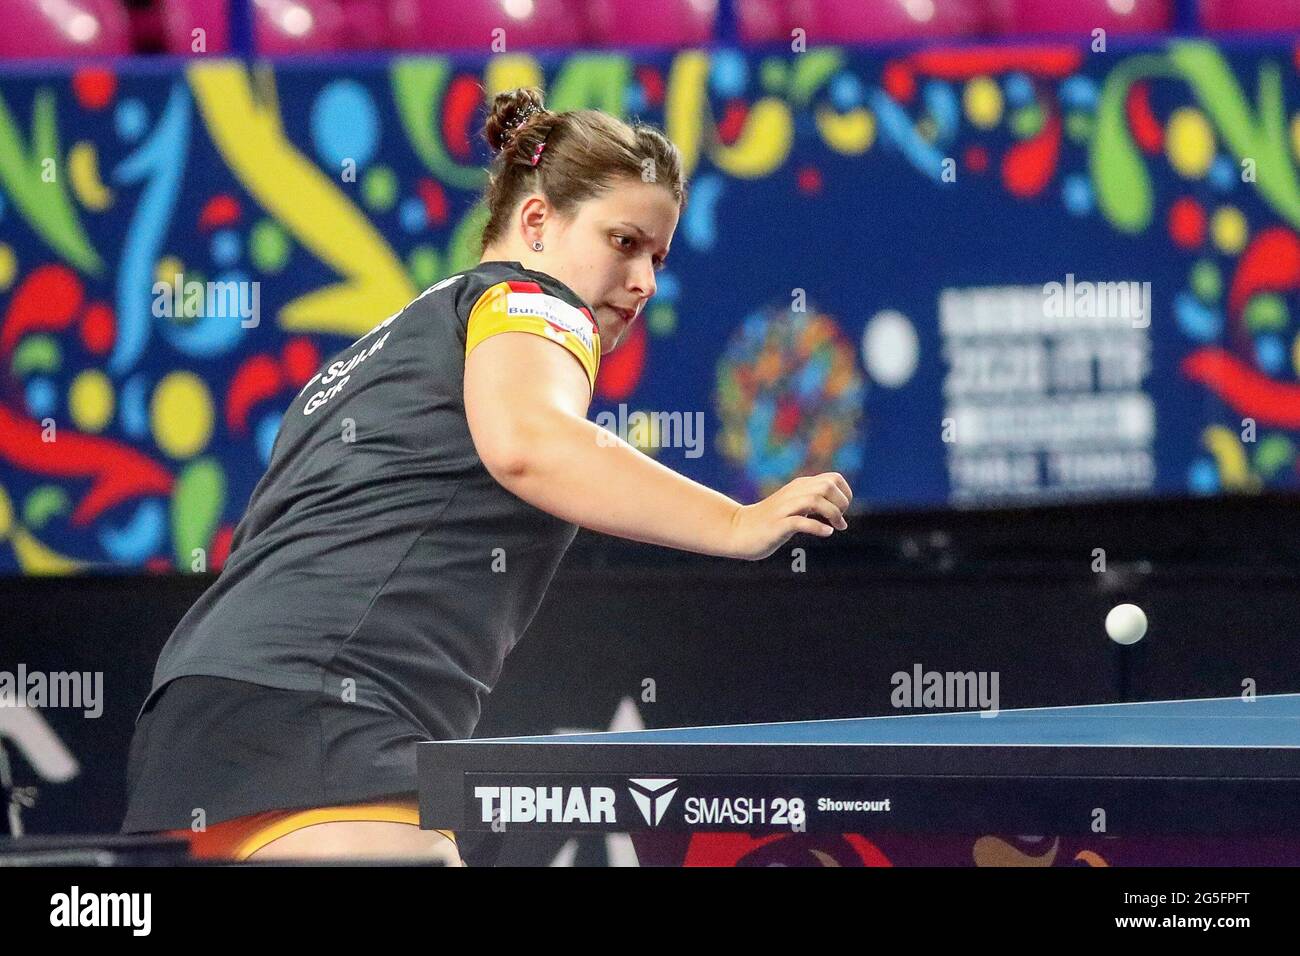 firo: 26.06.2021 Table tennis, EM, European Championship, 2020, 2021 In,  Poland, Warsaw, 39th European Table Tennis Championship, women, women  PETRISSA SOLJA, Germany our terms and conditions apply, can be viewed at  www.firosportphoto.de ¬